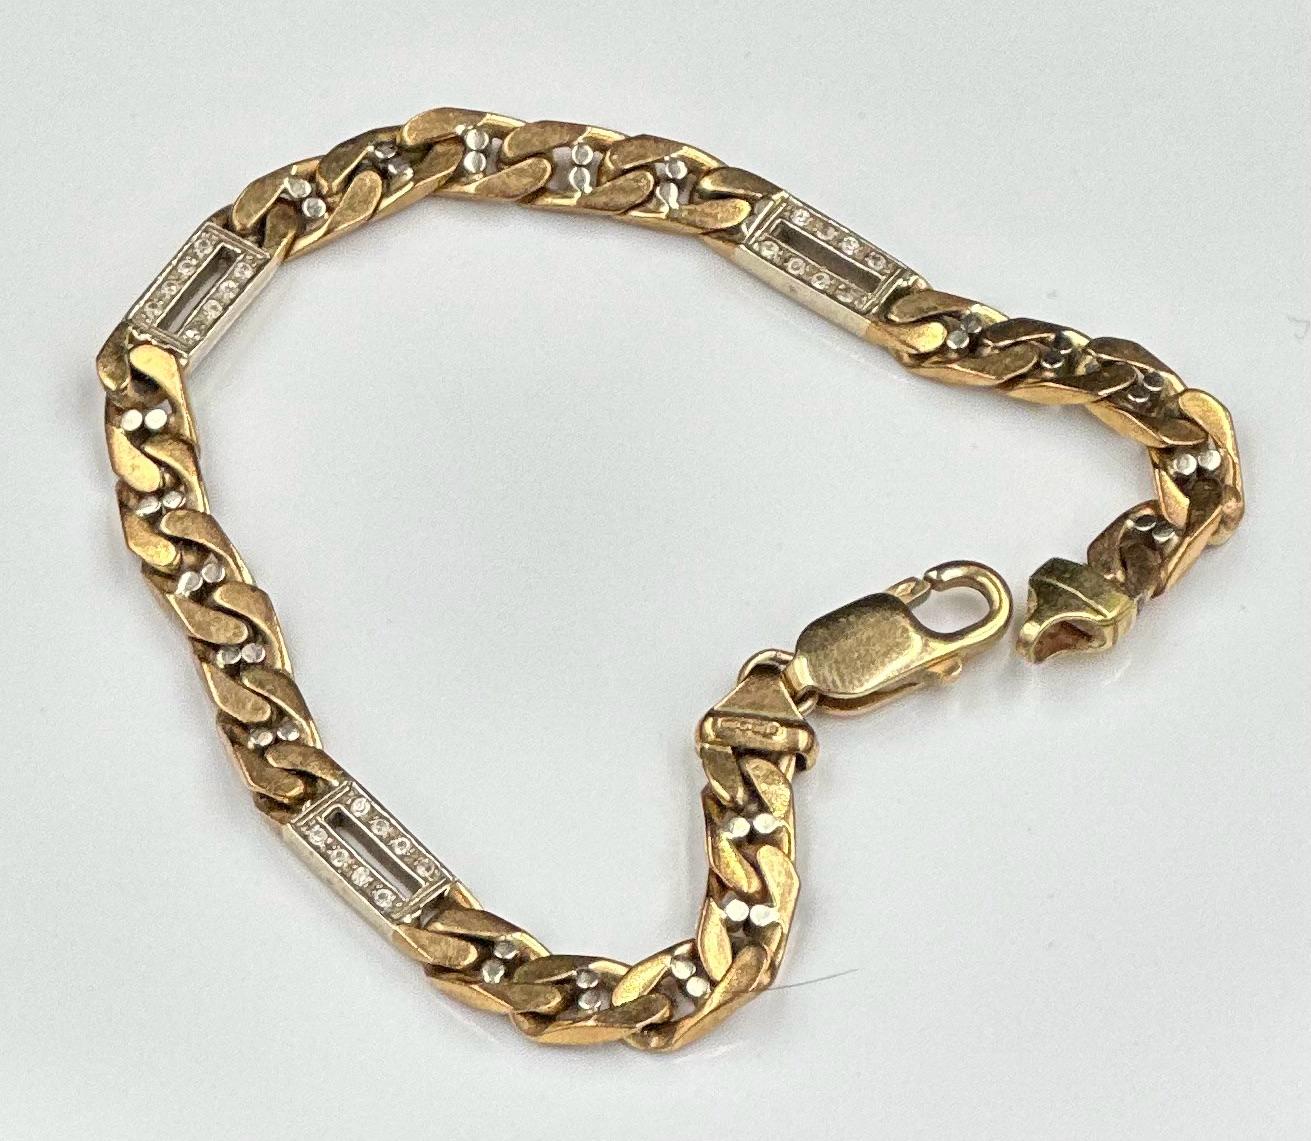 A 9ct gold bracelet with space white gold and diamond spacers, approximate total weight 18.8g - Image 2 of 2